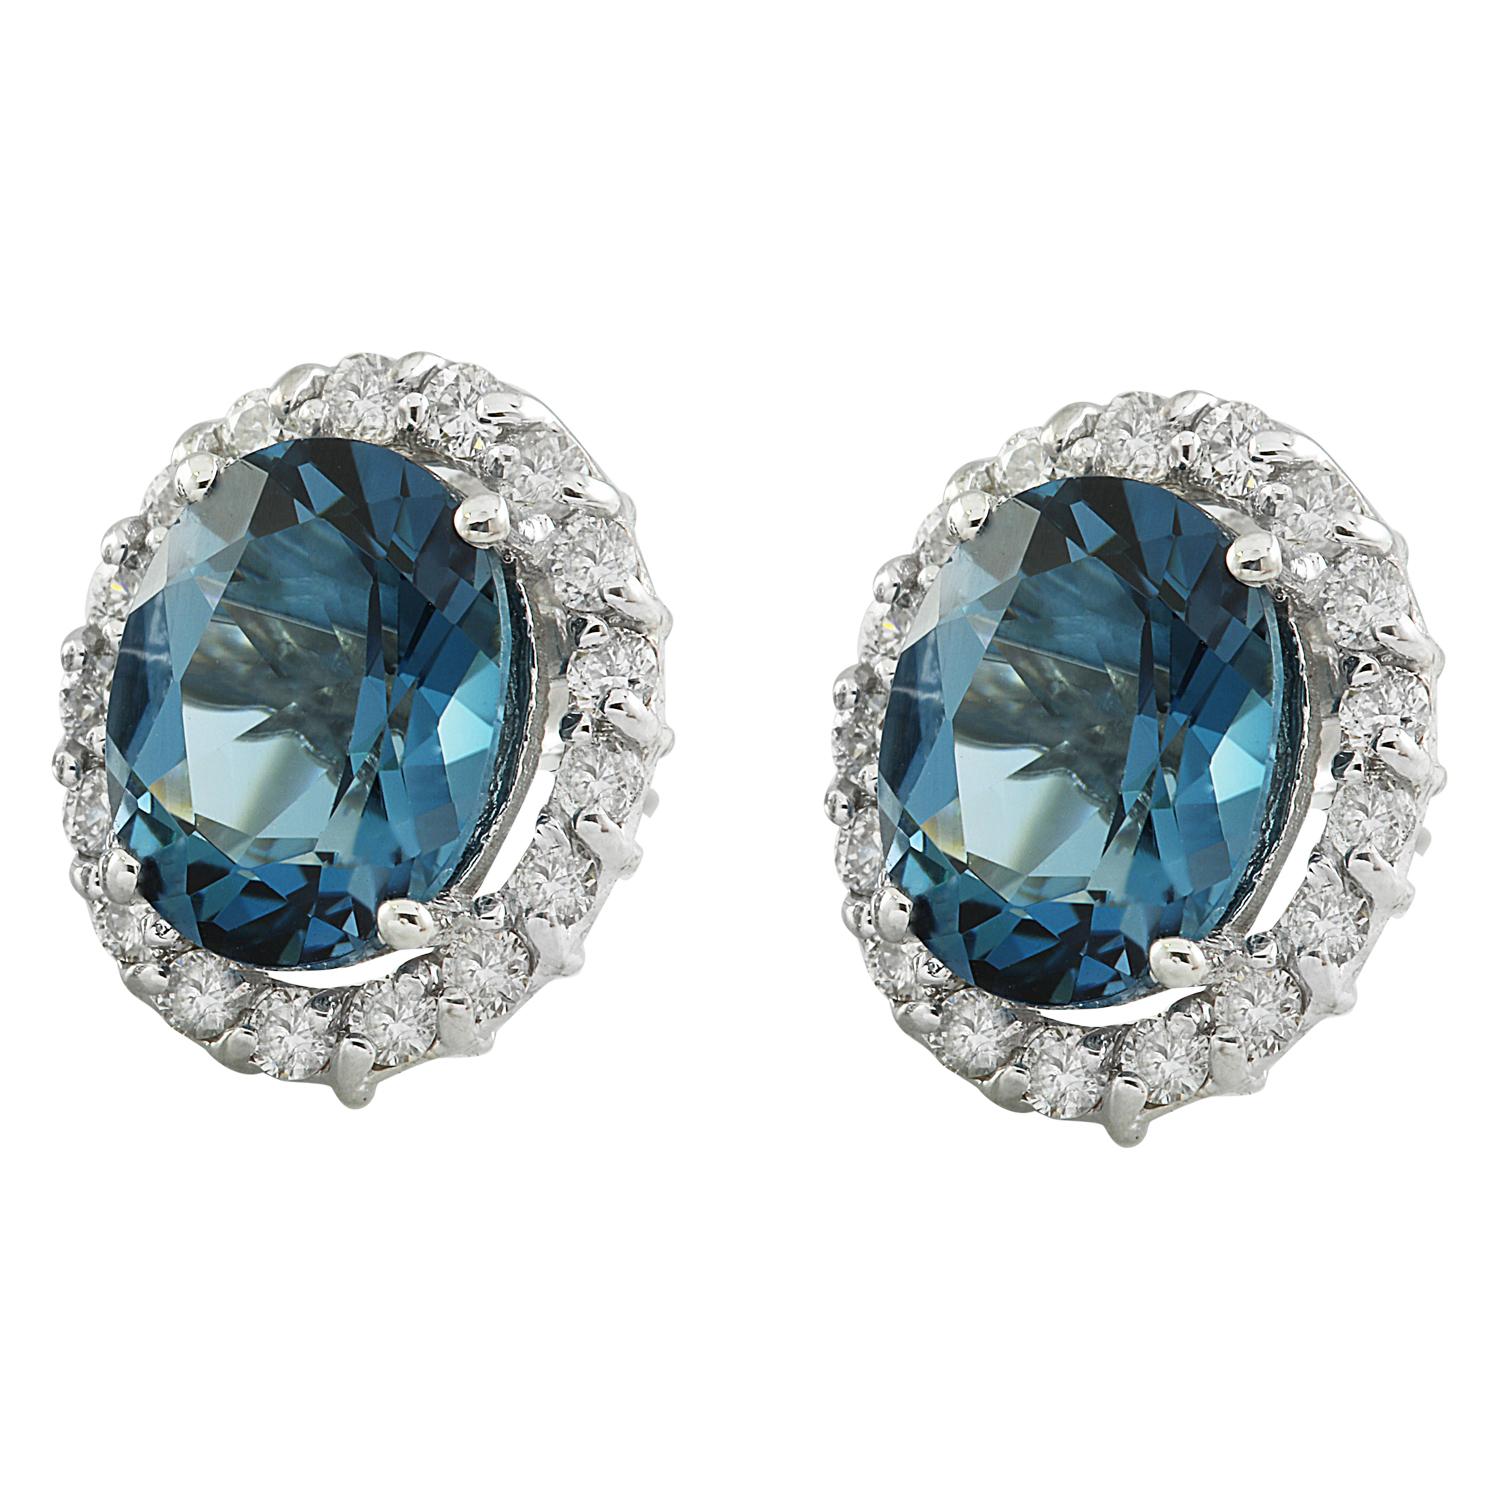 5.16 Carat Natural Topaz 14 Karat Solid White Gold Diamond Earrings
Stamped: 14K 
Total Earrings Weight: 3.1 Grams 
Topaz Weight: 4.46 Carat (9.00x7.00 Millimeters) 
Diamond Weight: 0.70 Carat (F-G Color, VS2-SI1 Clarity )
Quantity: 34
 Face